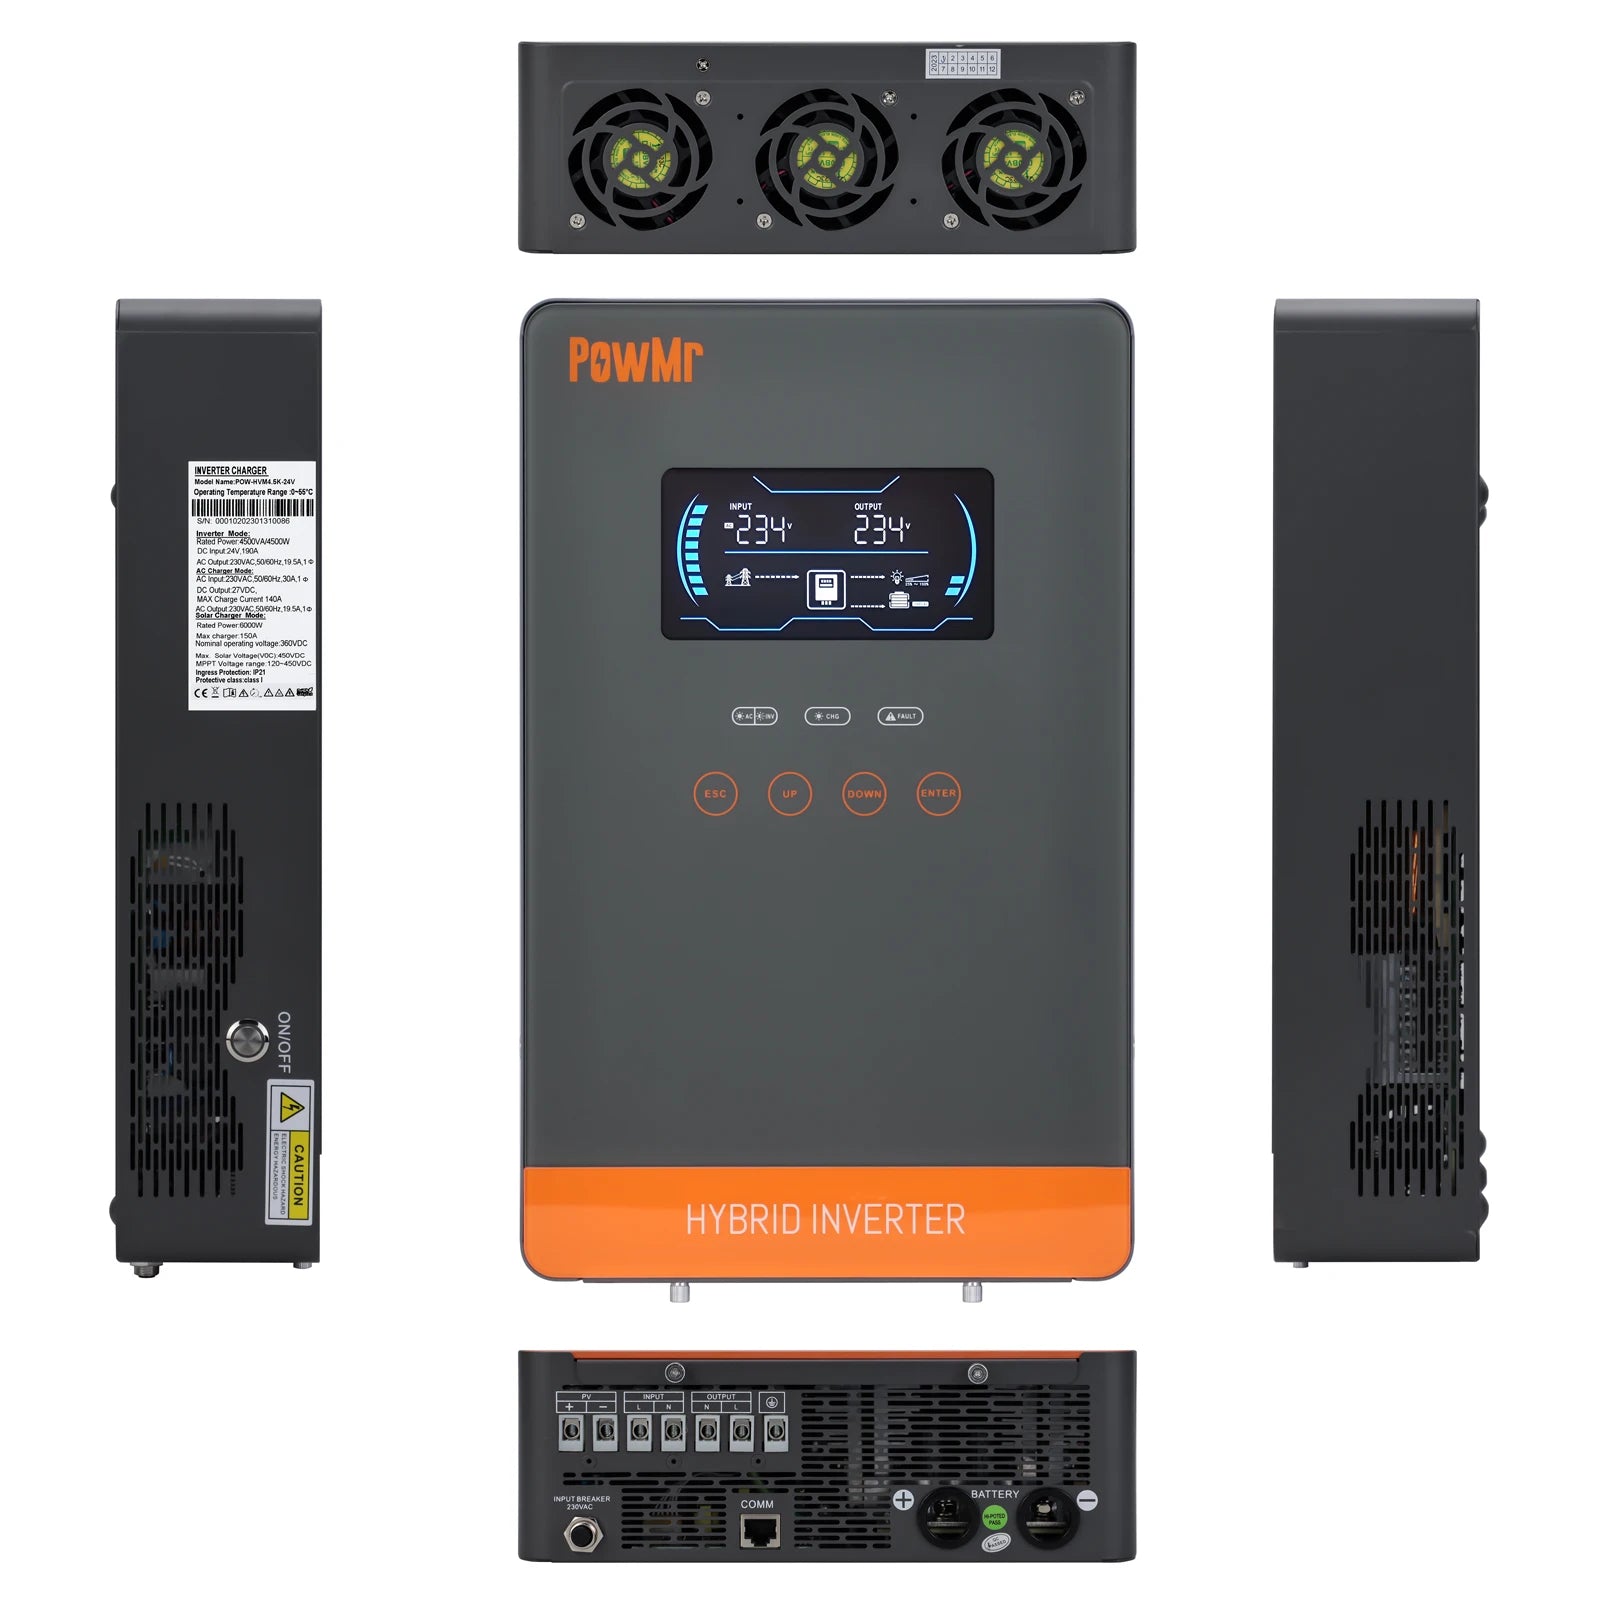 PowMr Solar Inverter, PowMr Solar Hybrid Inverter: Charges batteries from solar panels and converts DC to AC power.